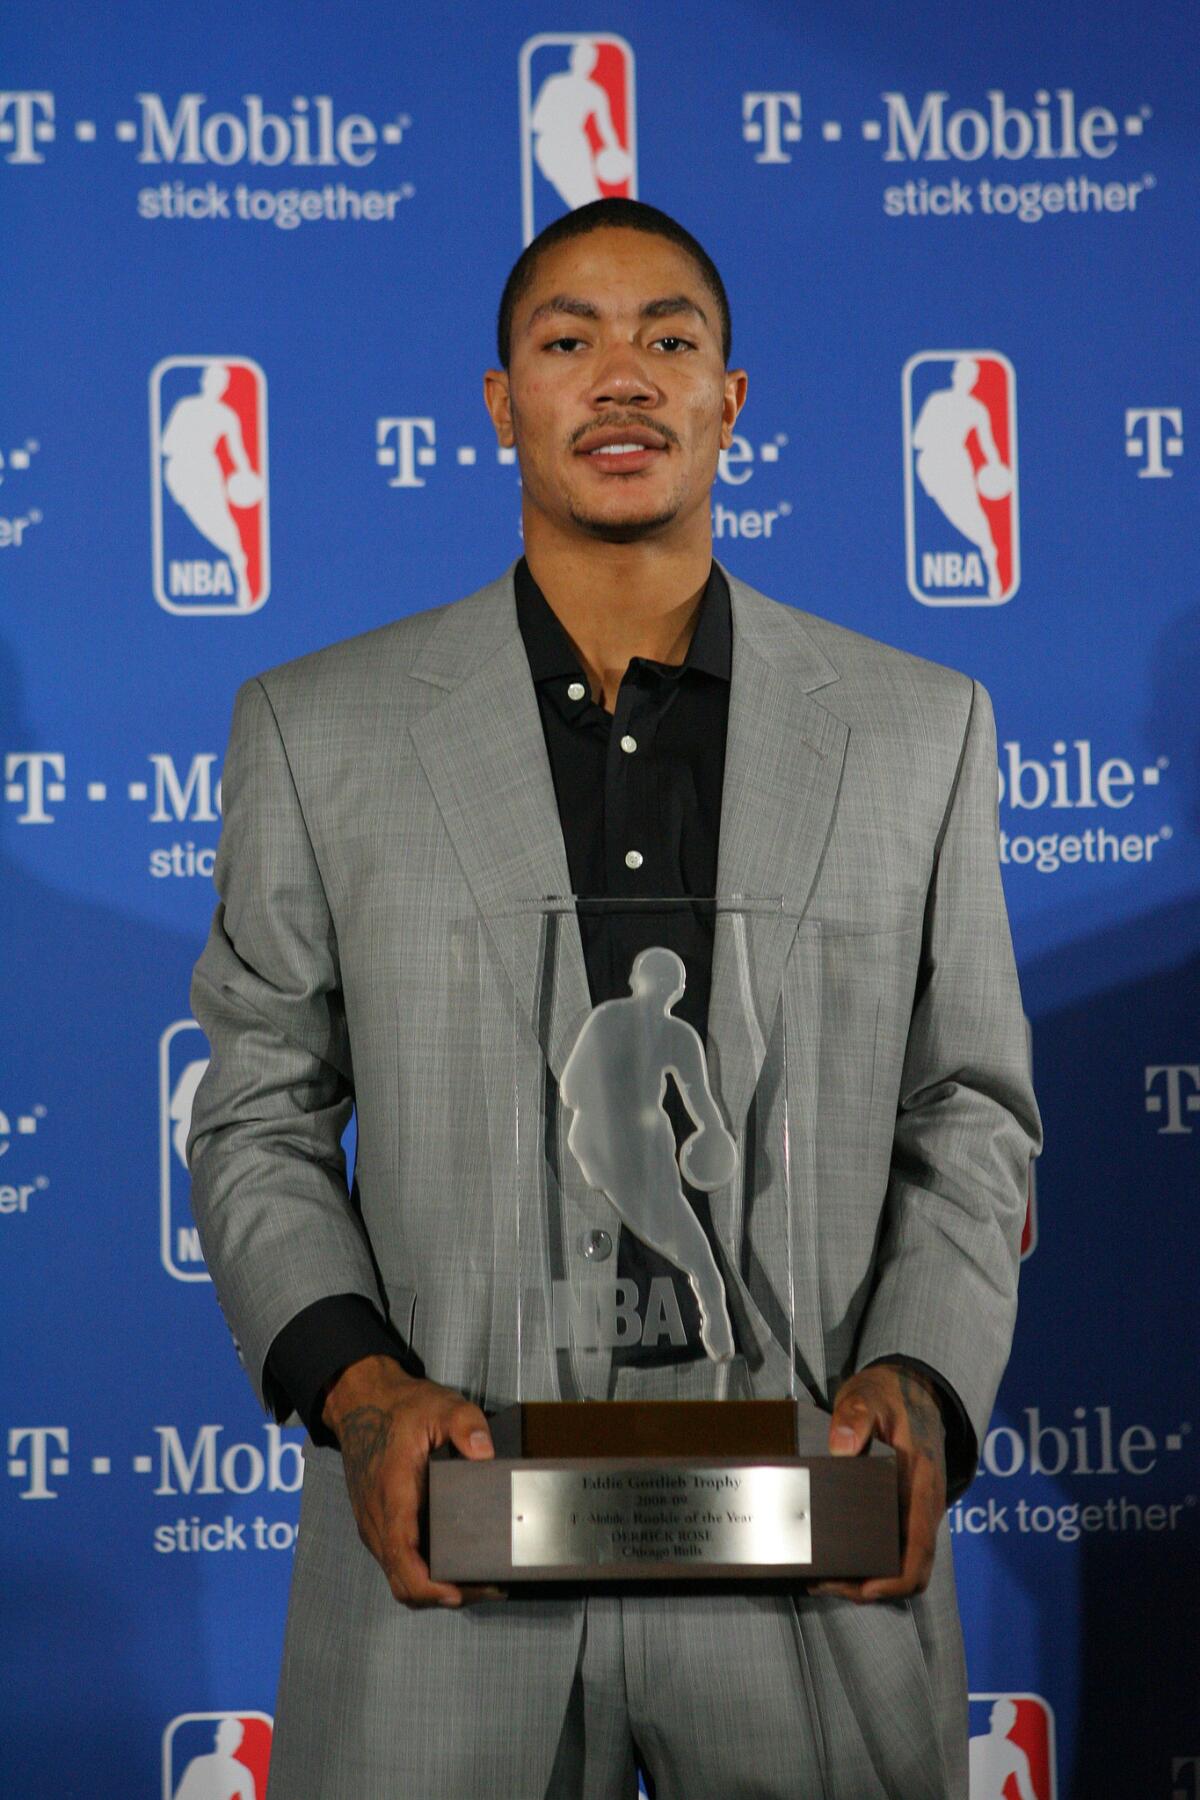 Derrick Rose poses with his trophy after winning NBA Rookie Of The Year in 2009. (Stacey Wescott / Chicago Tribune)